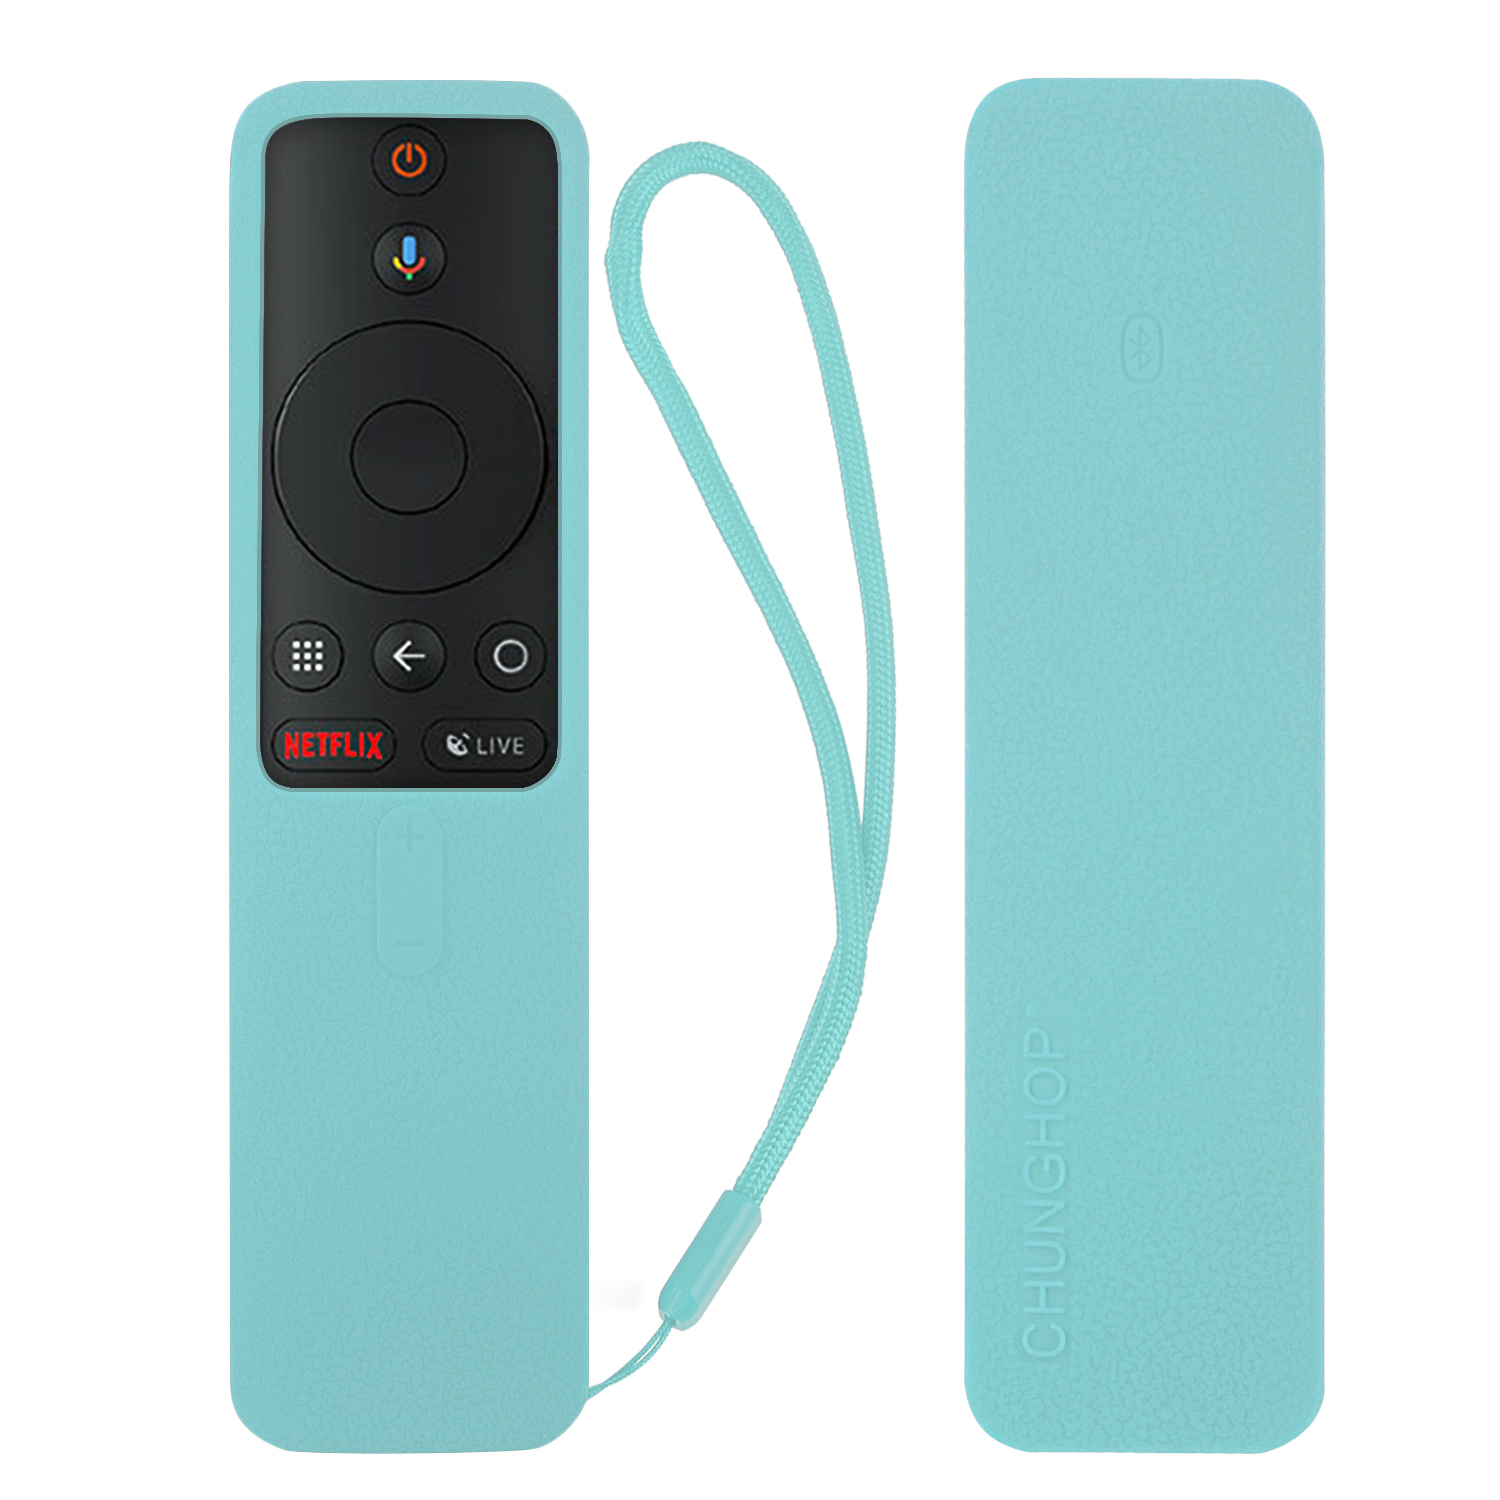 Covers for Xiaomi Mi TV Box s Bluetooth Wifi Smart Remote Control Case Silicone Shockproof Protective Skin-Friendly